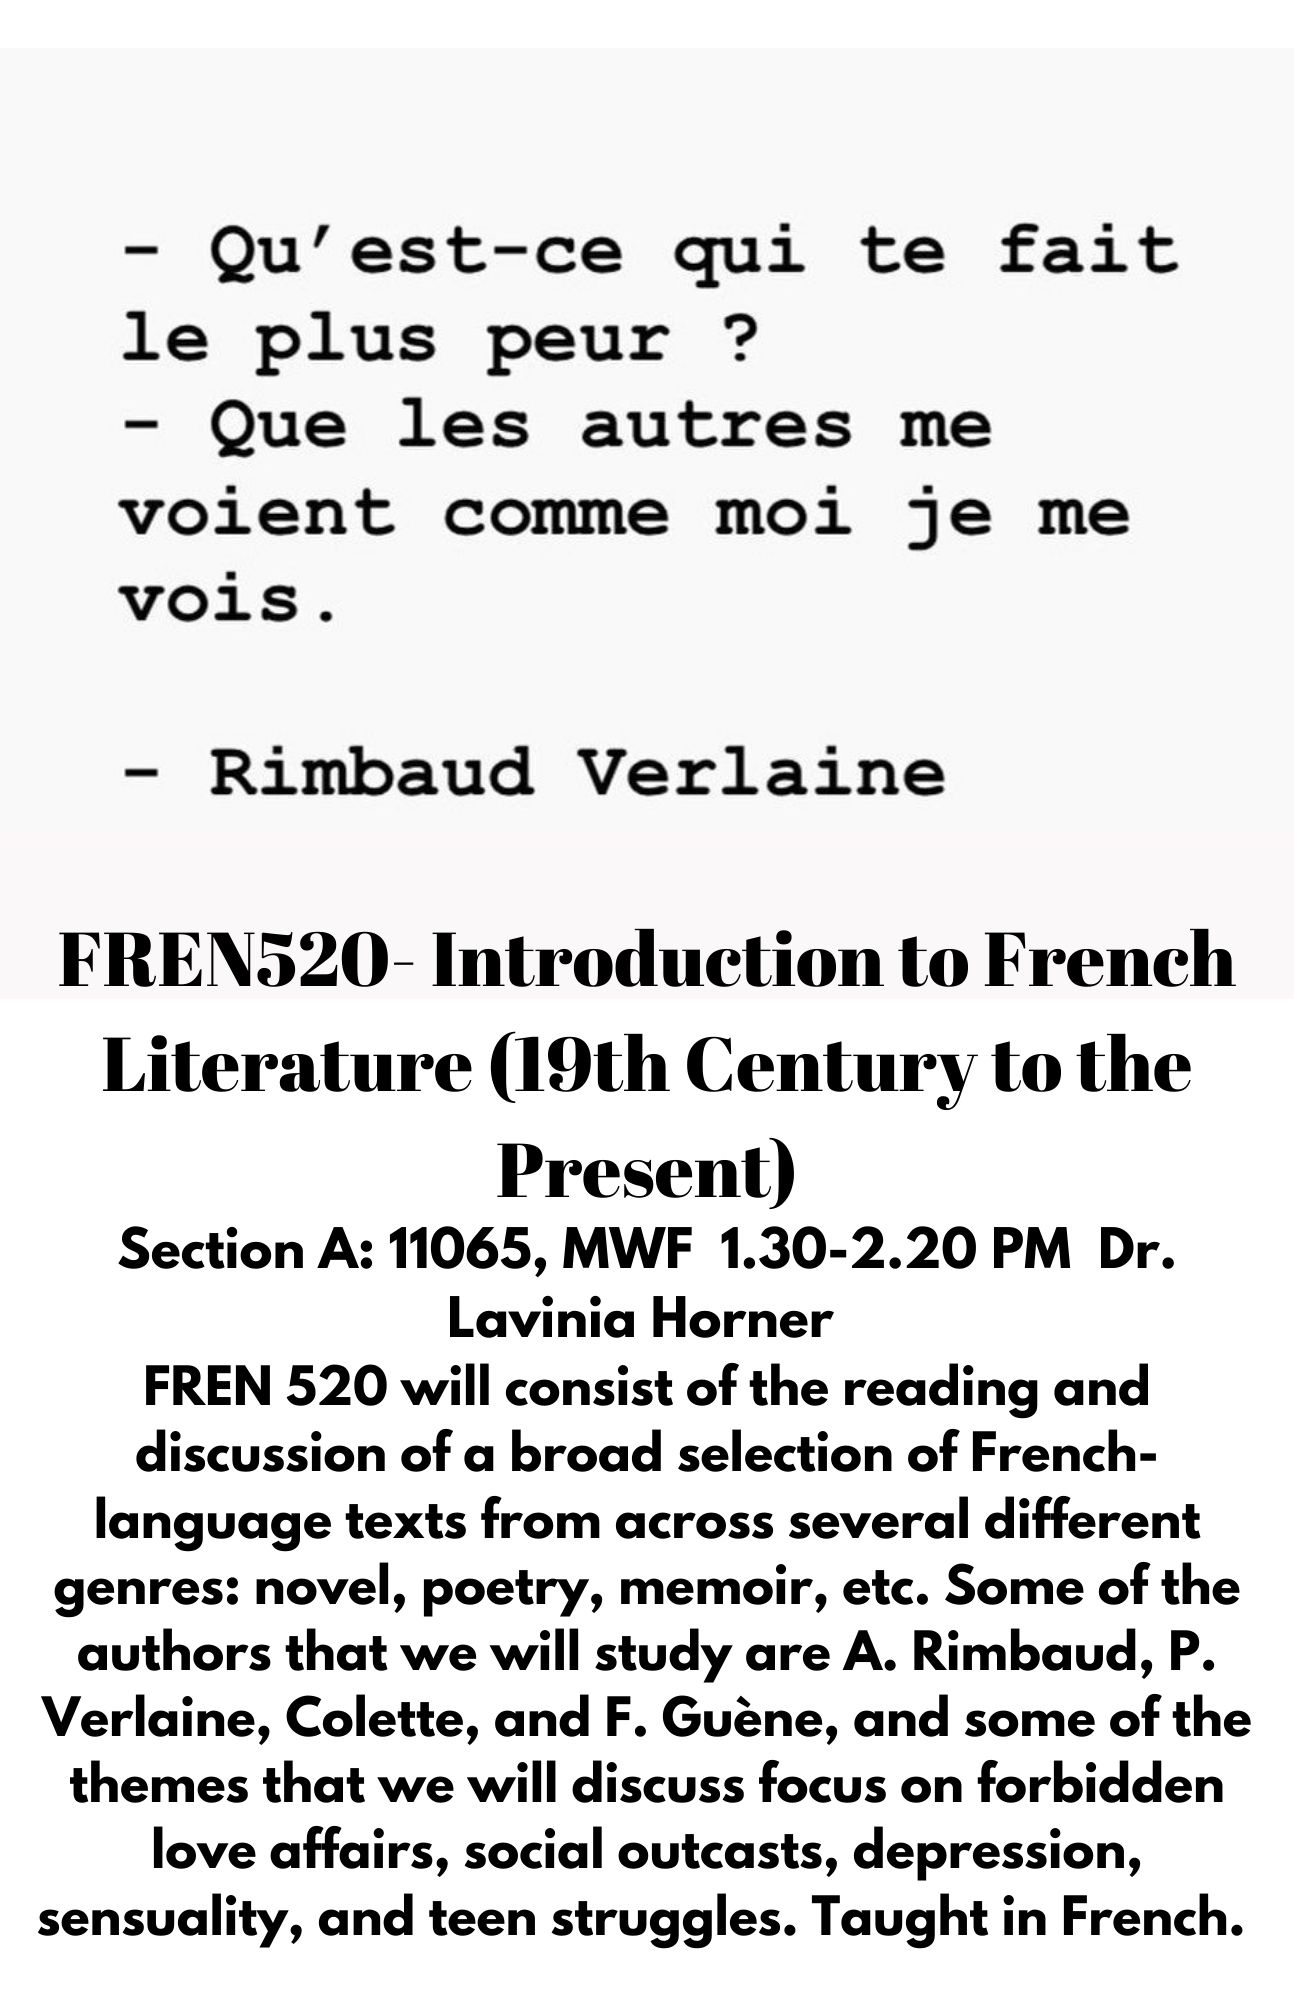 FREN520- Introduction to French Literature (19th Century to the Present)Section A: 11065, MWF  1.30-2.20 PM  Dr. Lavinia Horner  FREN 520 will consist of the reading and discussion of a broad selection of French-language texts from across several different genres: novel, poetry, memoir, etc. Some of the authors that we will study are A. Rimbaud, P. Verlaine, Colette, and F. Guène, and some of the themes that we will discuss focus on forbidden love affairs, social outcasts, depression, sensuality, and teen struggles. Taught in French.  